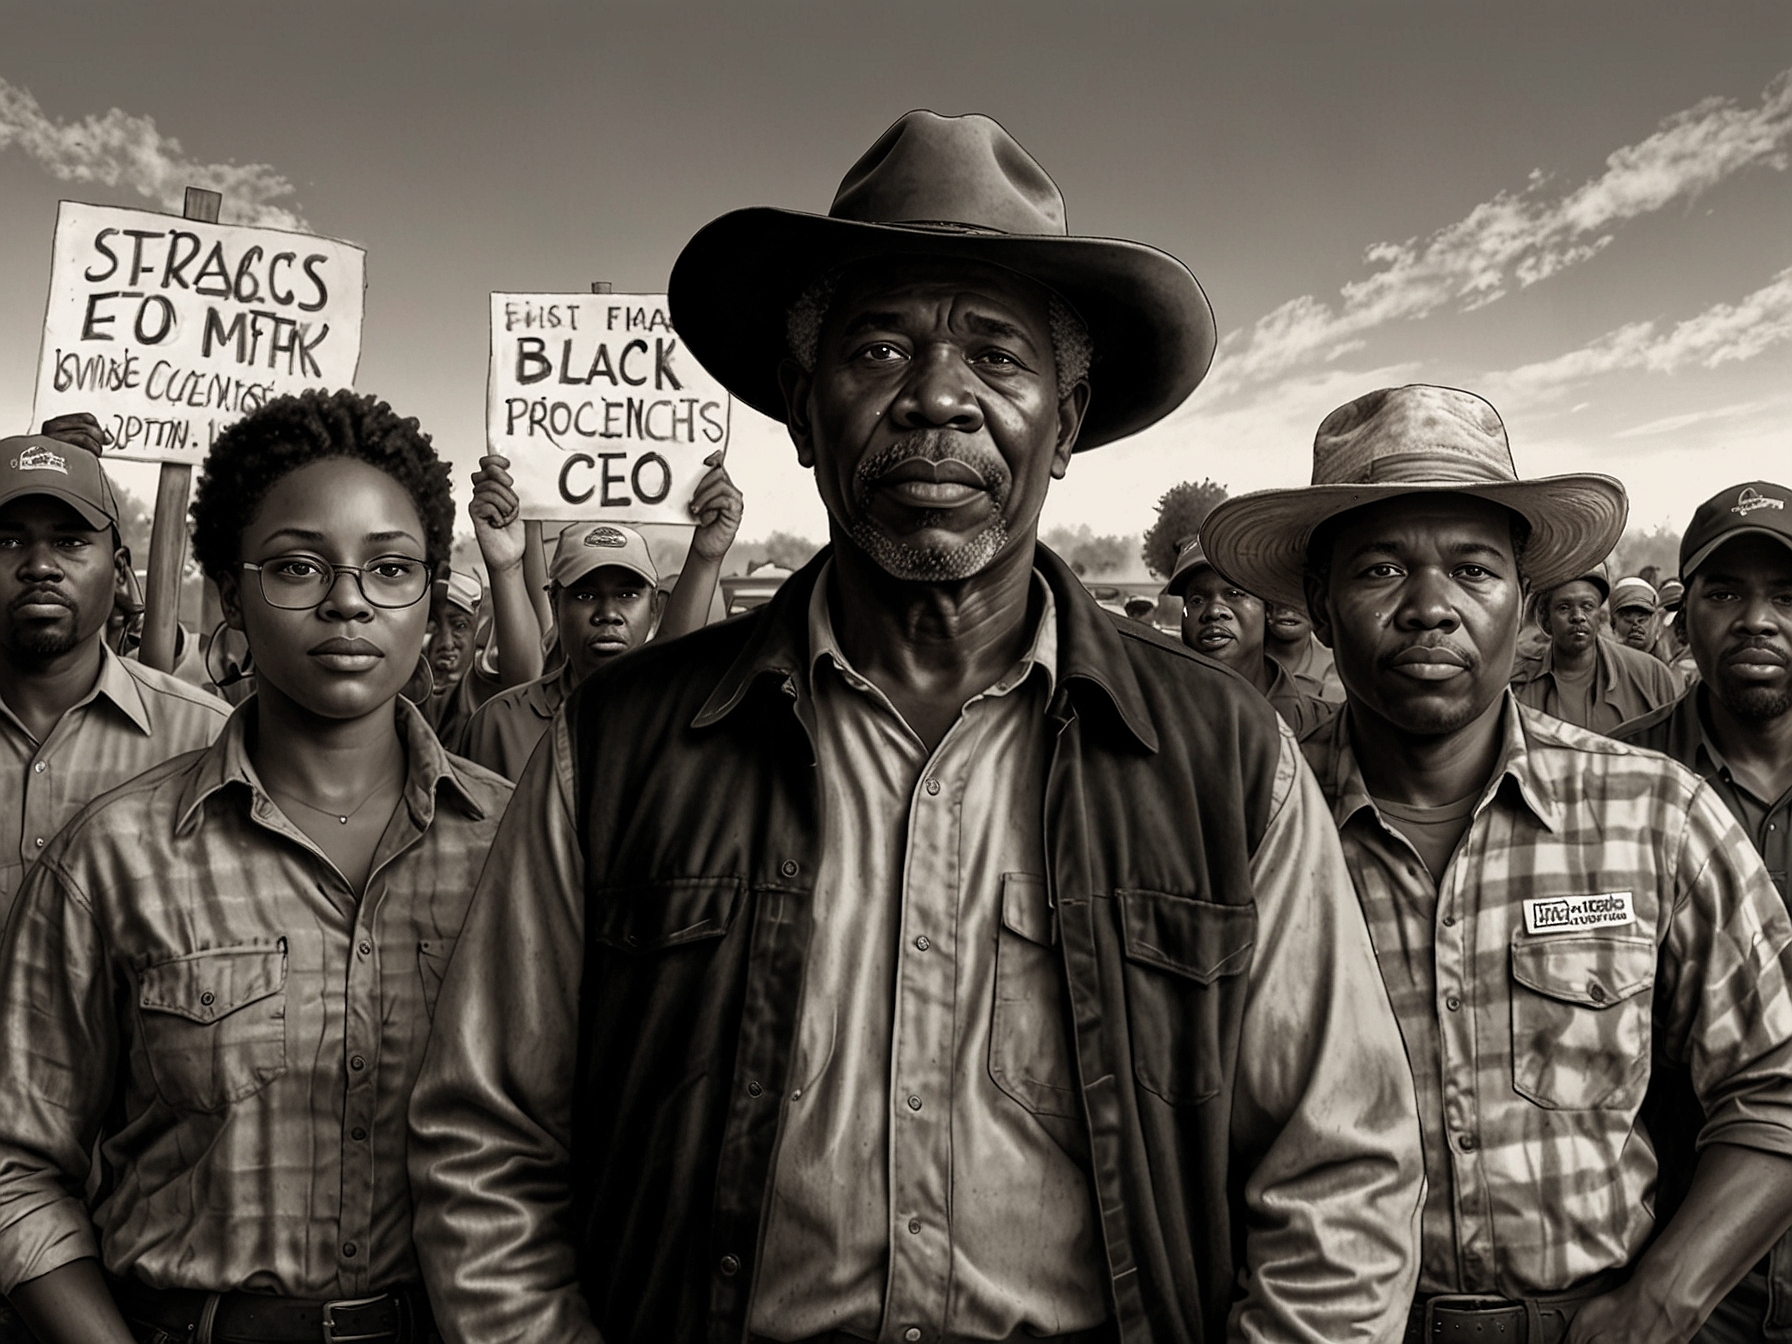 A group of Black farmers holding signs and protesting, representing the National Black Farmers Association’s call for Tractor Supply's CEO to resign due to cutbacks in DEI efforts.